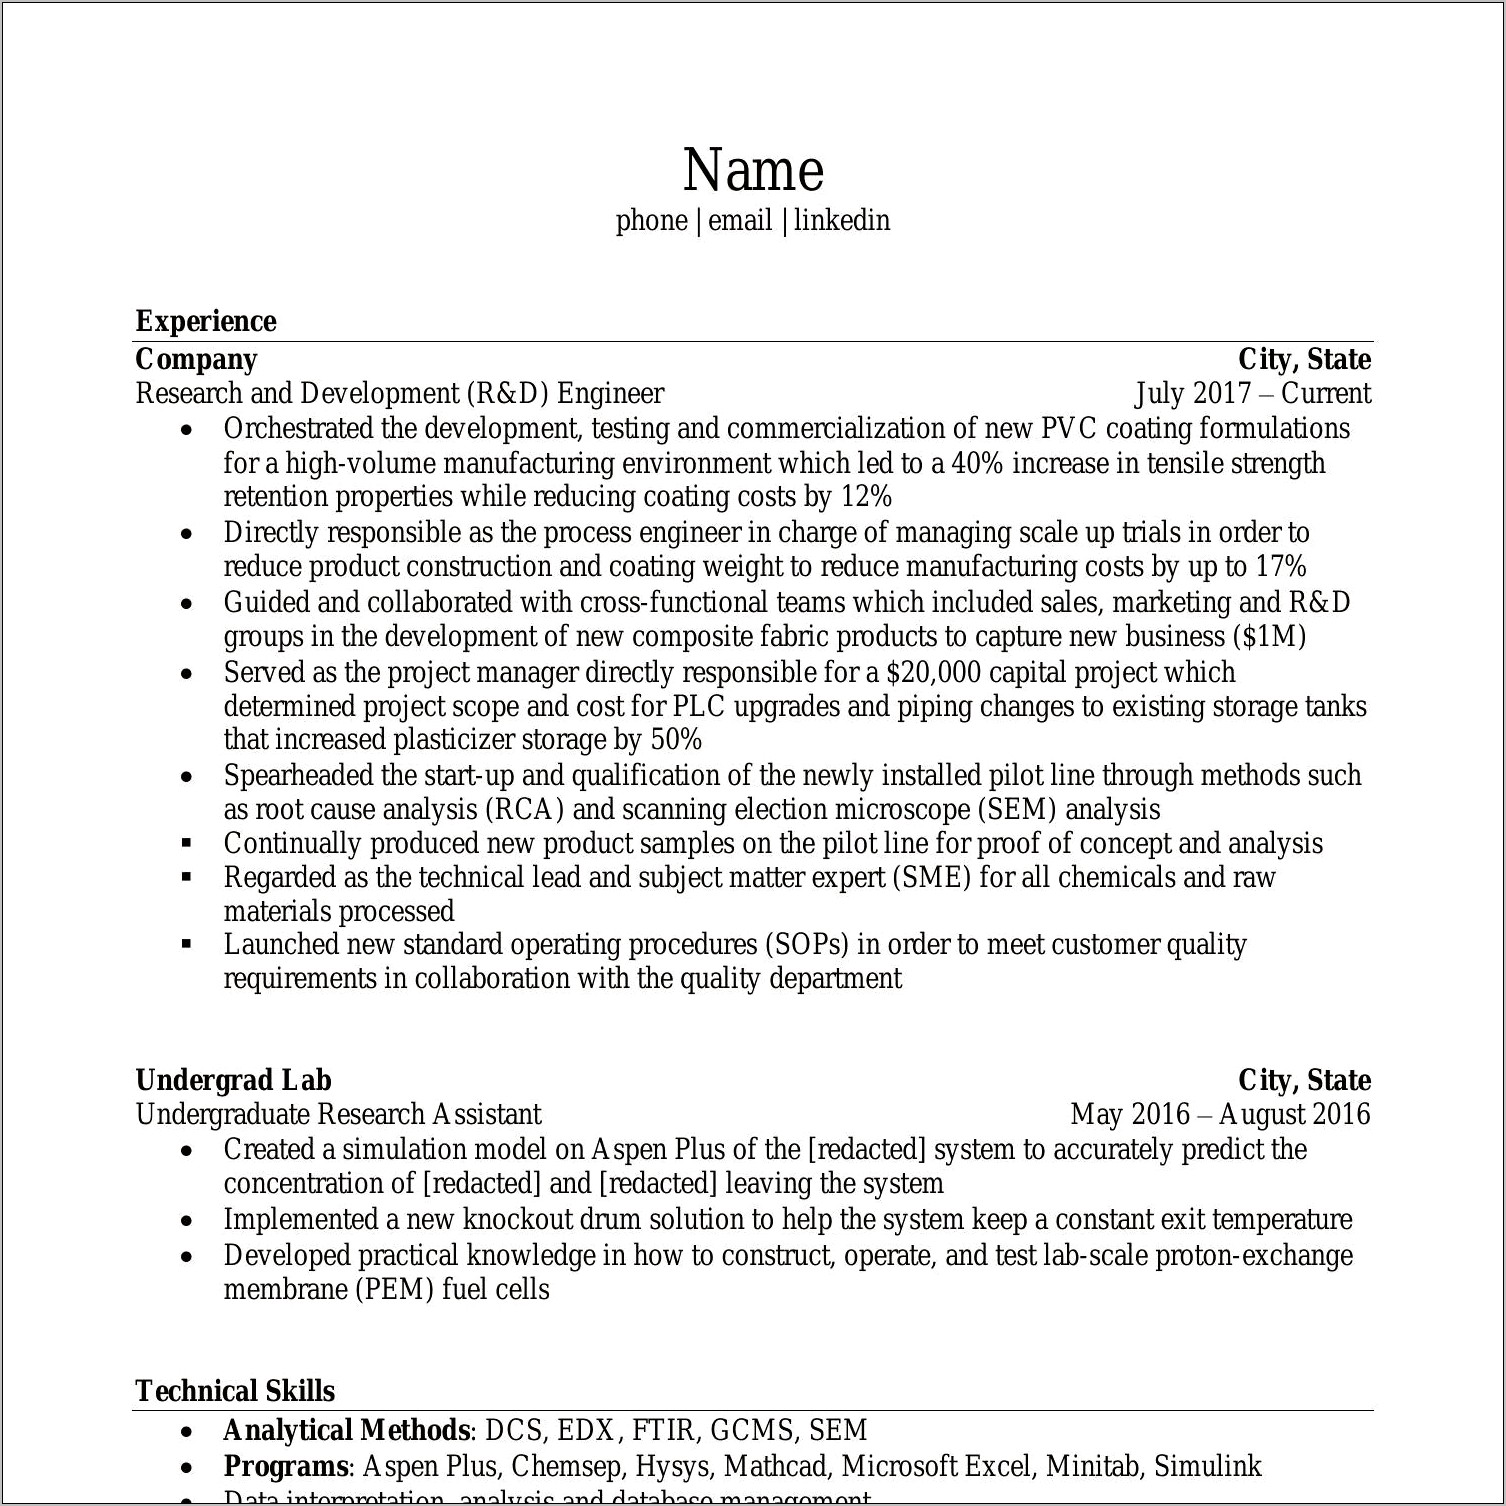 Chemical Engineering Skills For Resume